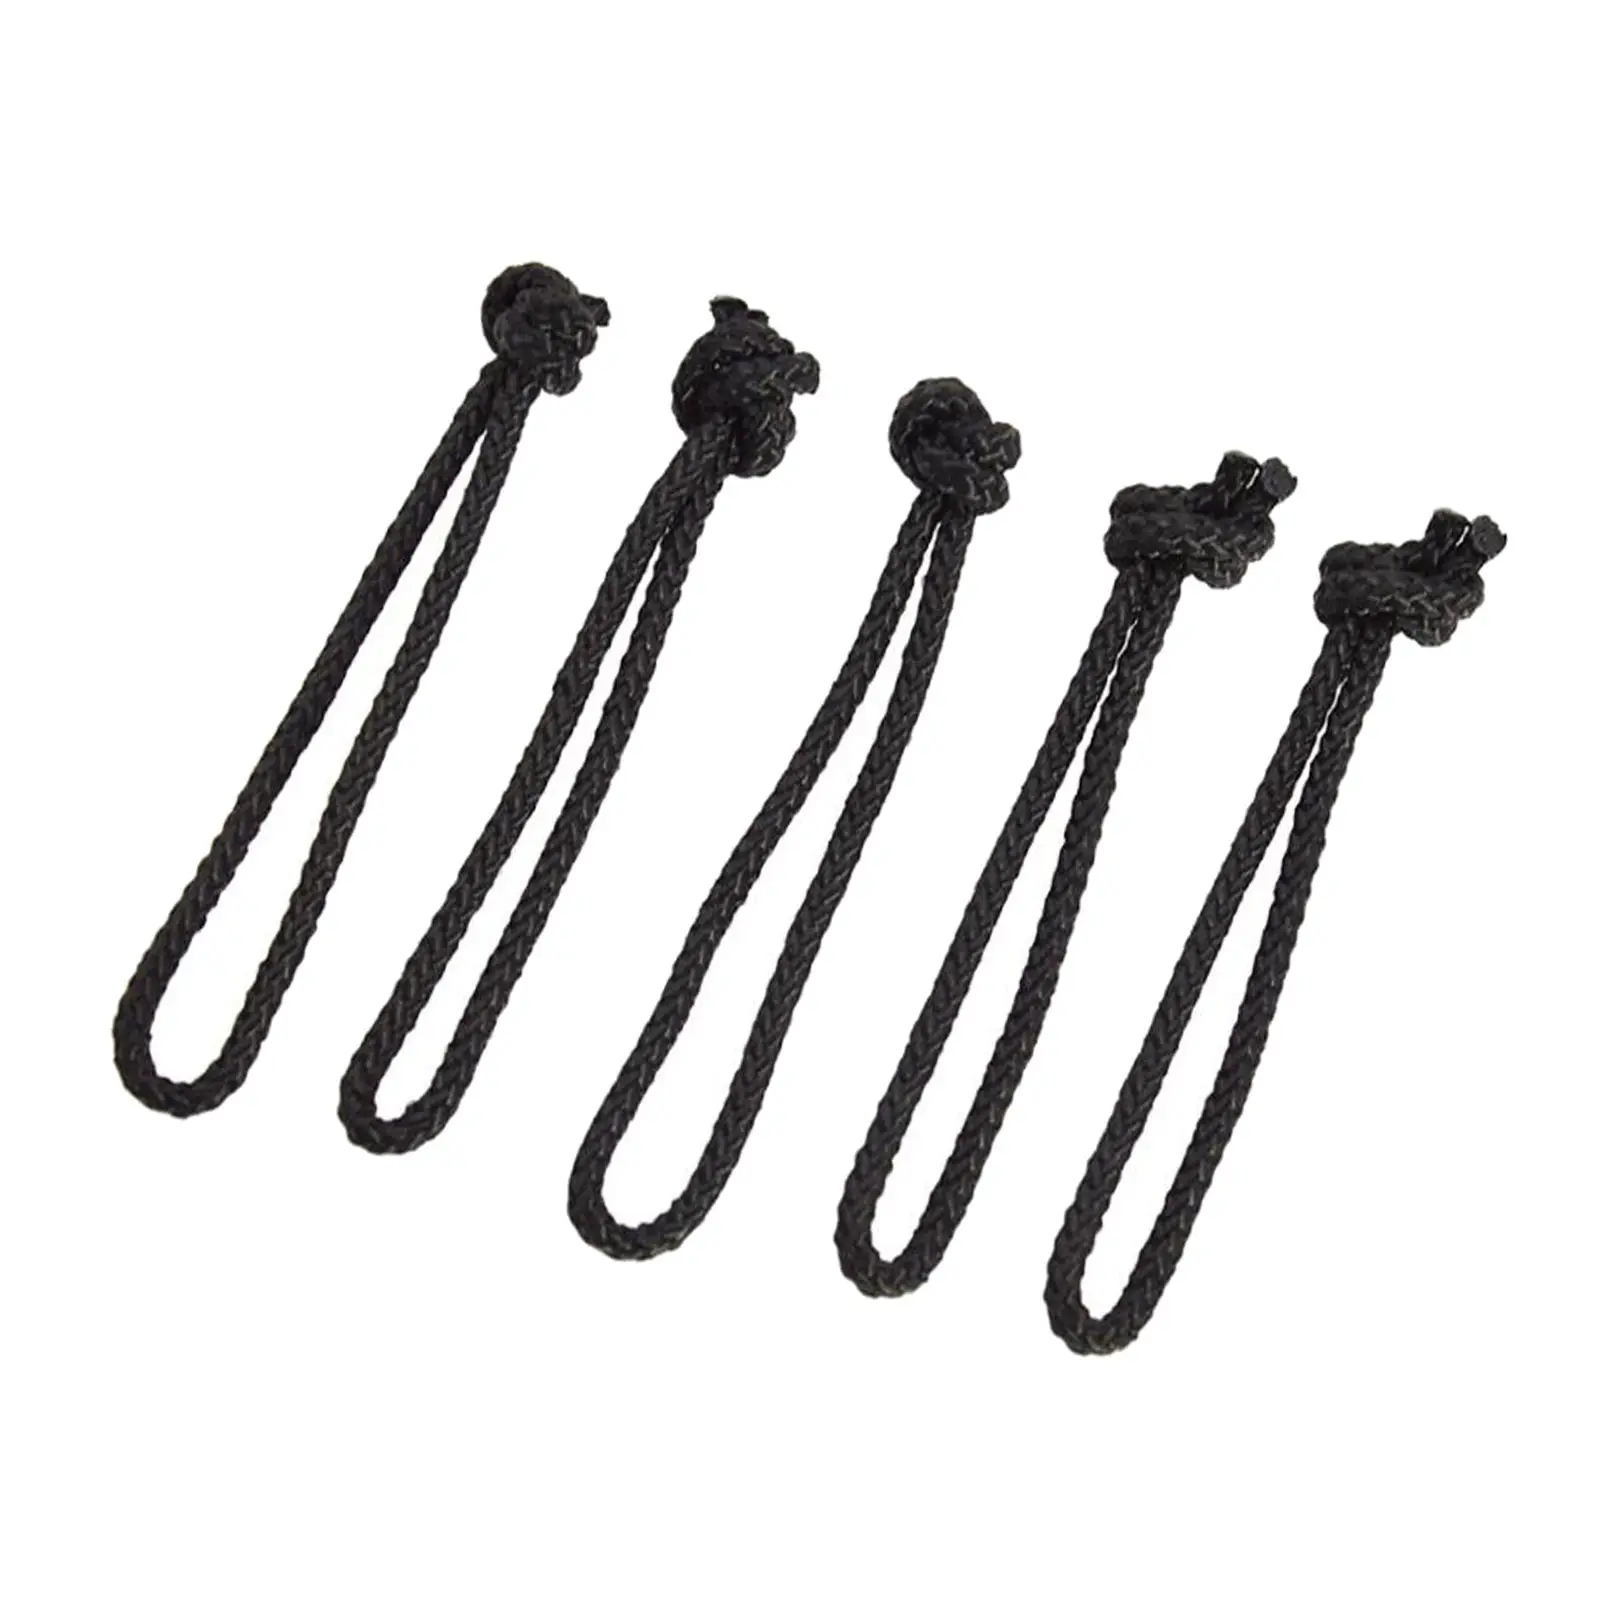 Set of 5 Leash String Cord for Surfboard Longboard Replacement Outdoor